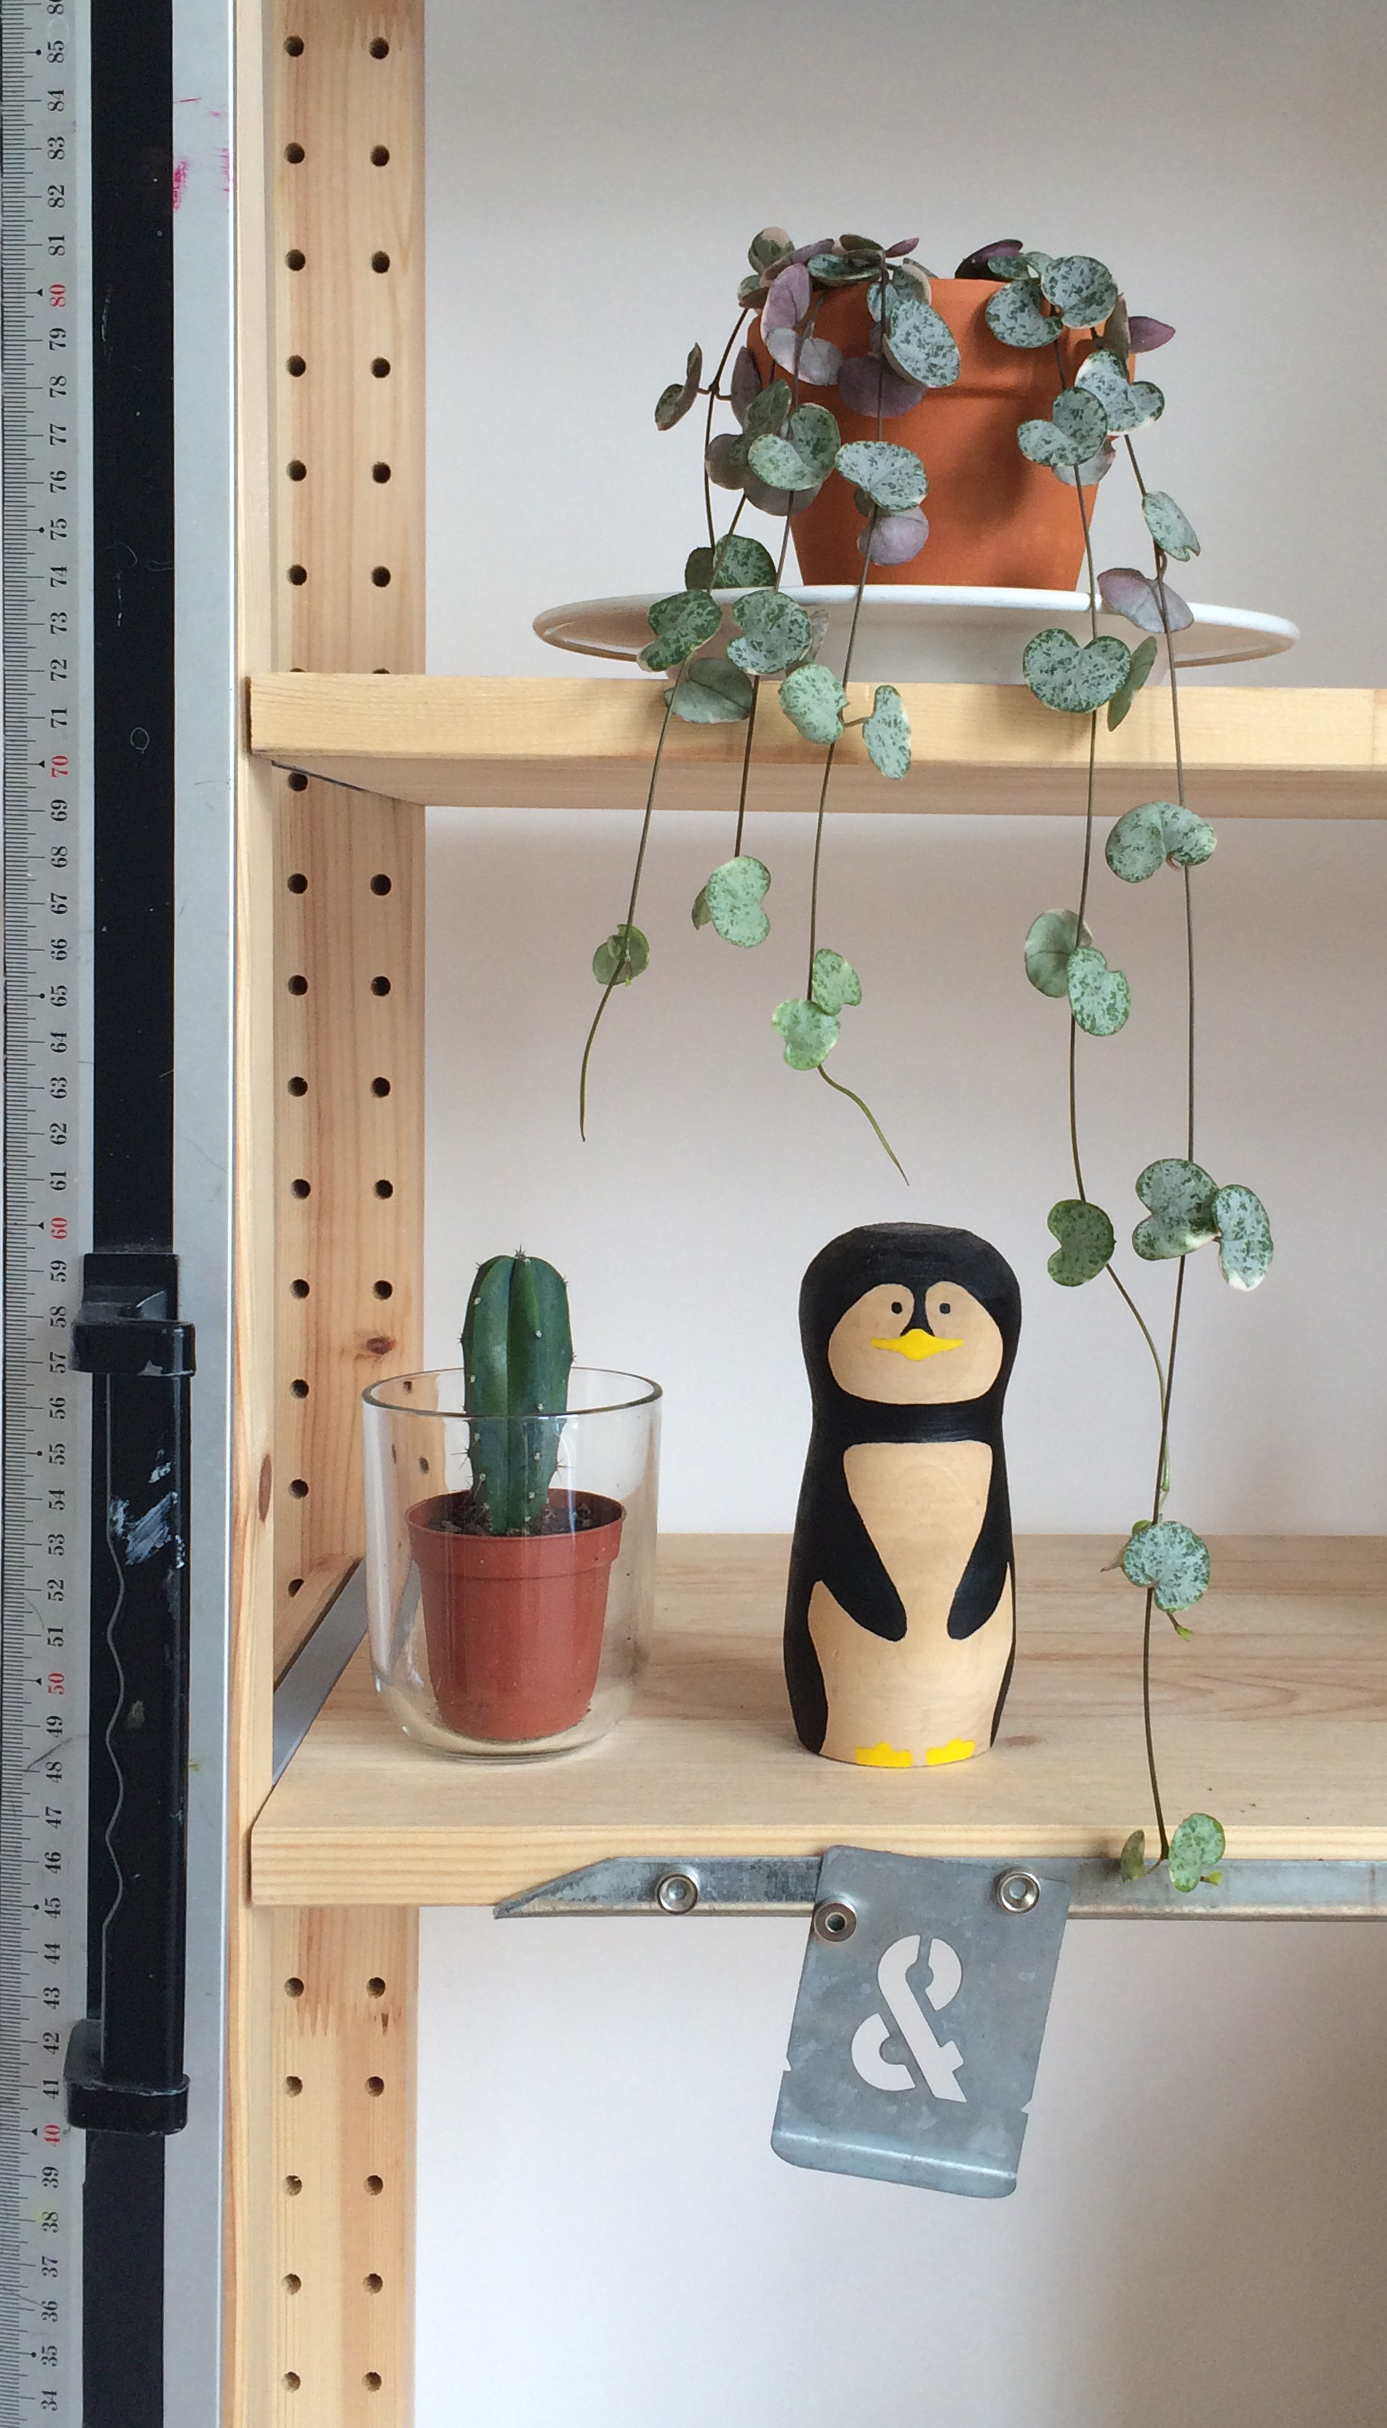 Two plants, a ruler, an ampersand stencil, and a penguin figurine on a shelf